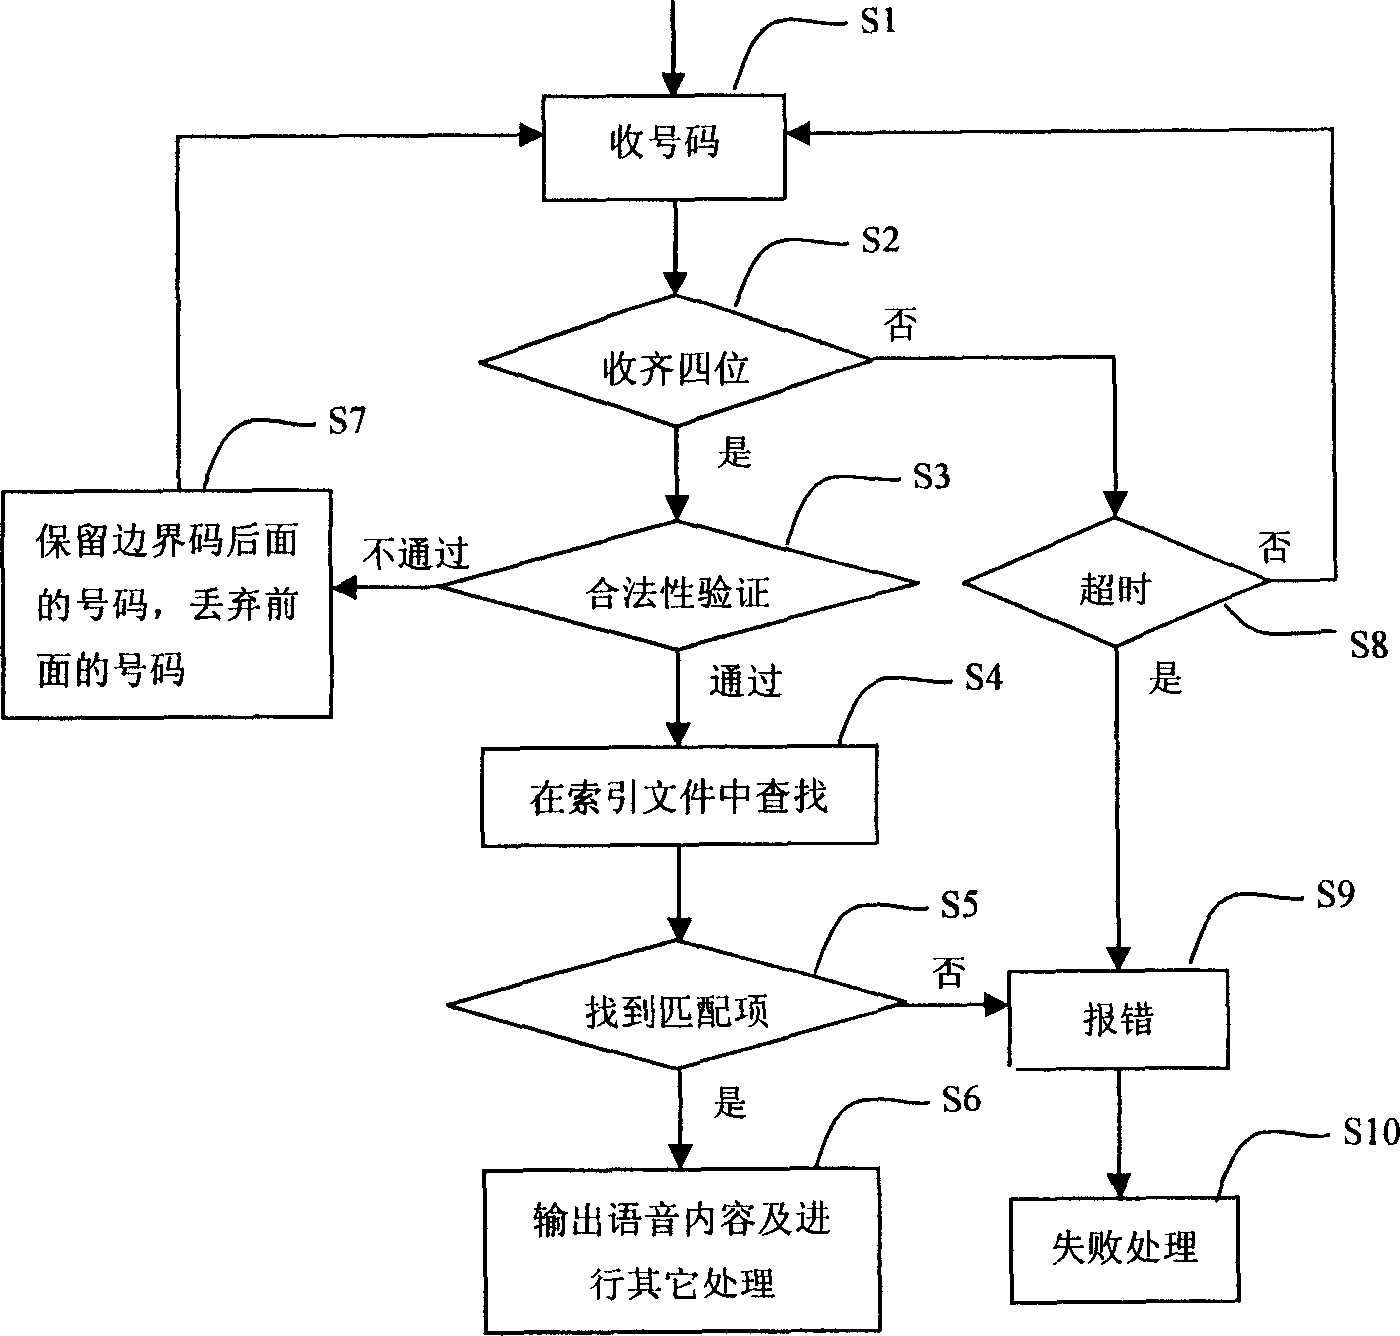 Method for automatic recognizing voice for limited range